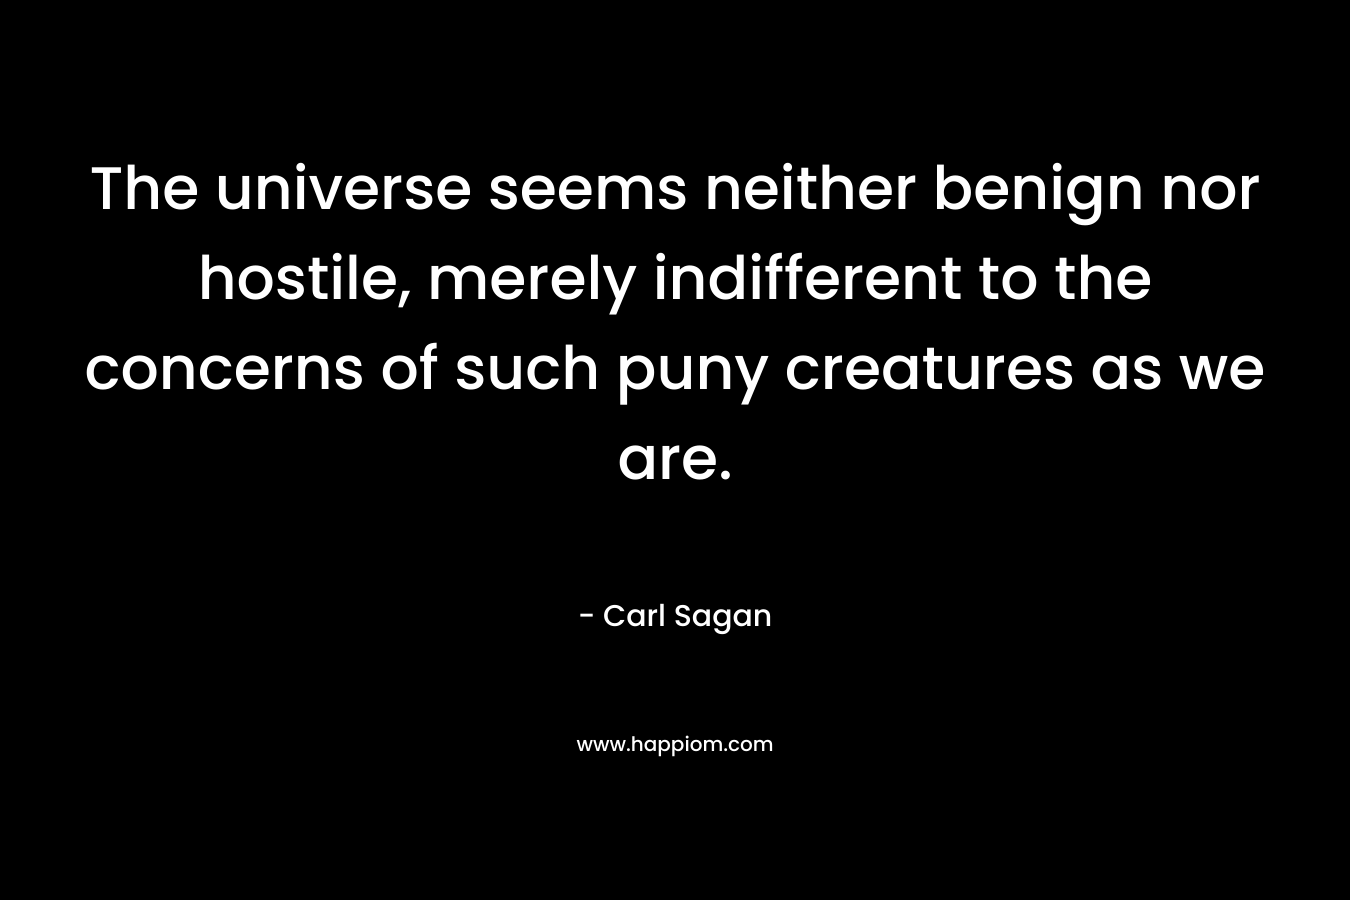 The universe seems neither benign nor hostile, merely indifferent to the concerns of such puny creatures as we are. – Carl Sagan